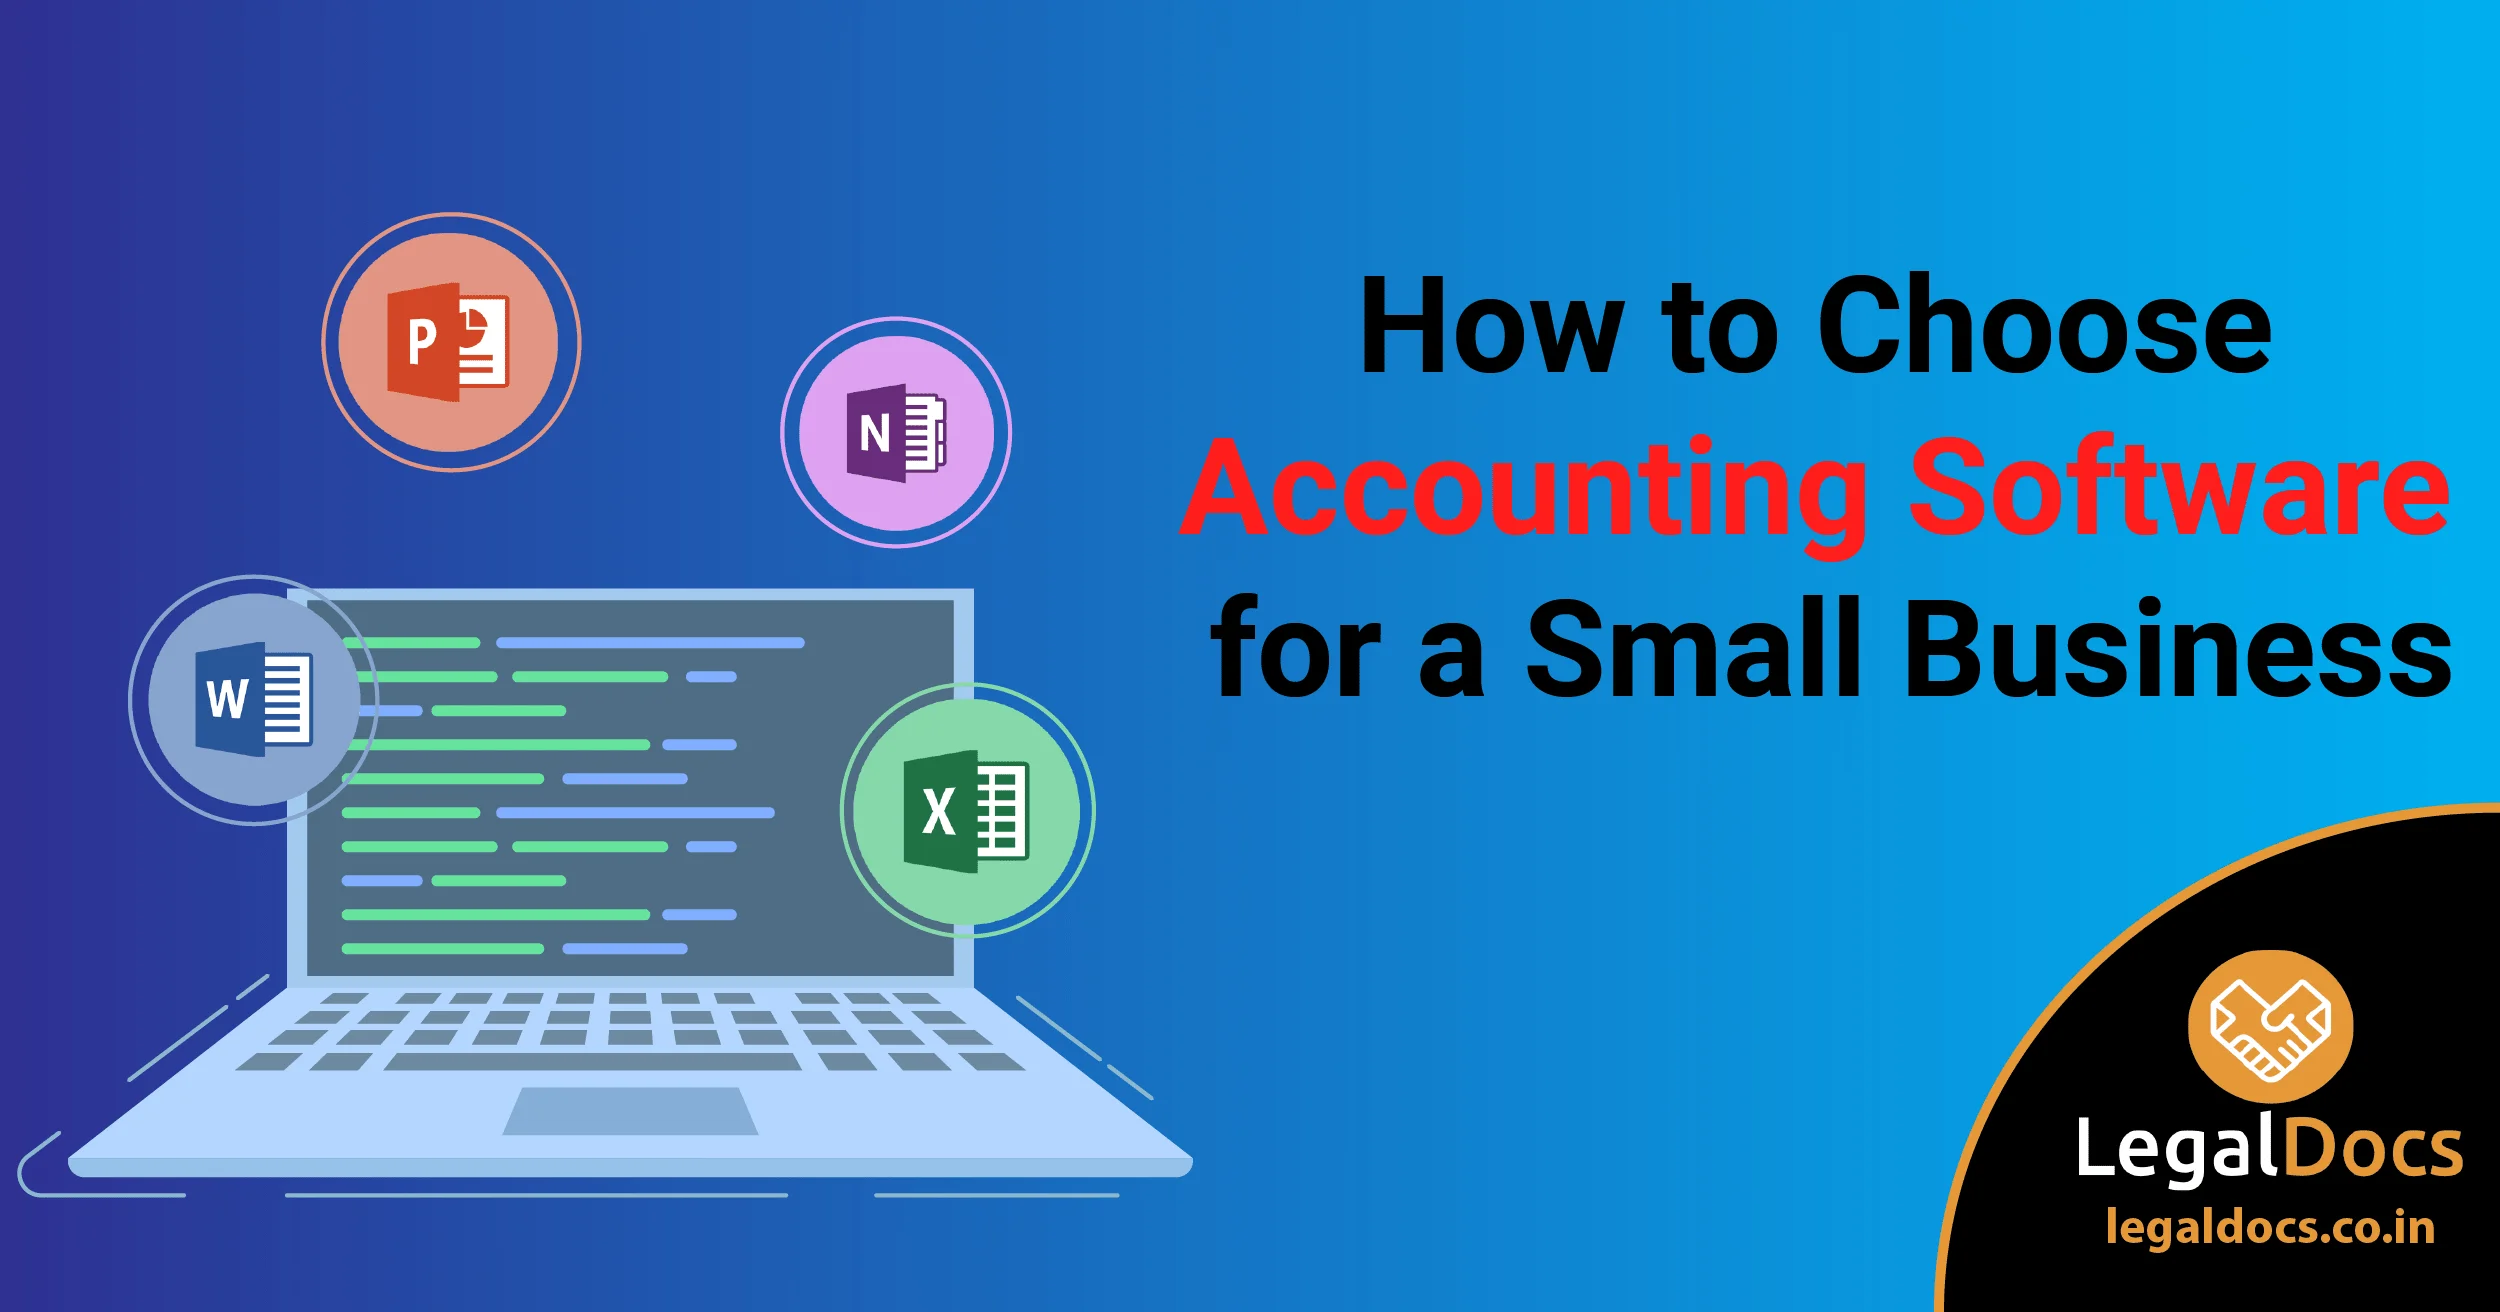  Accounting Software for a Small Business